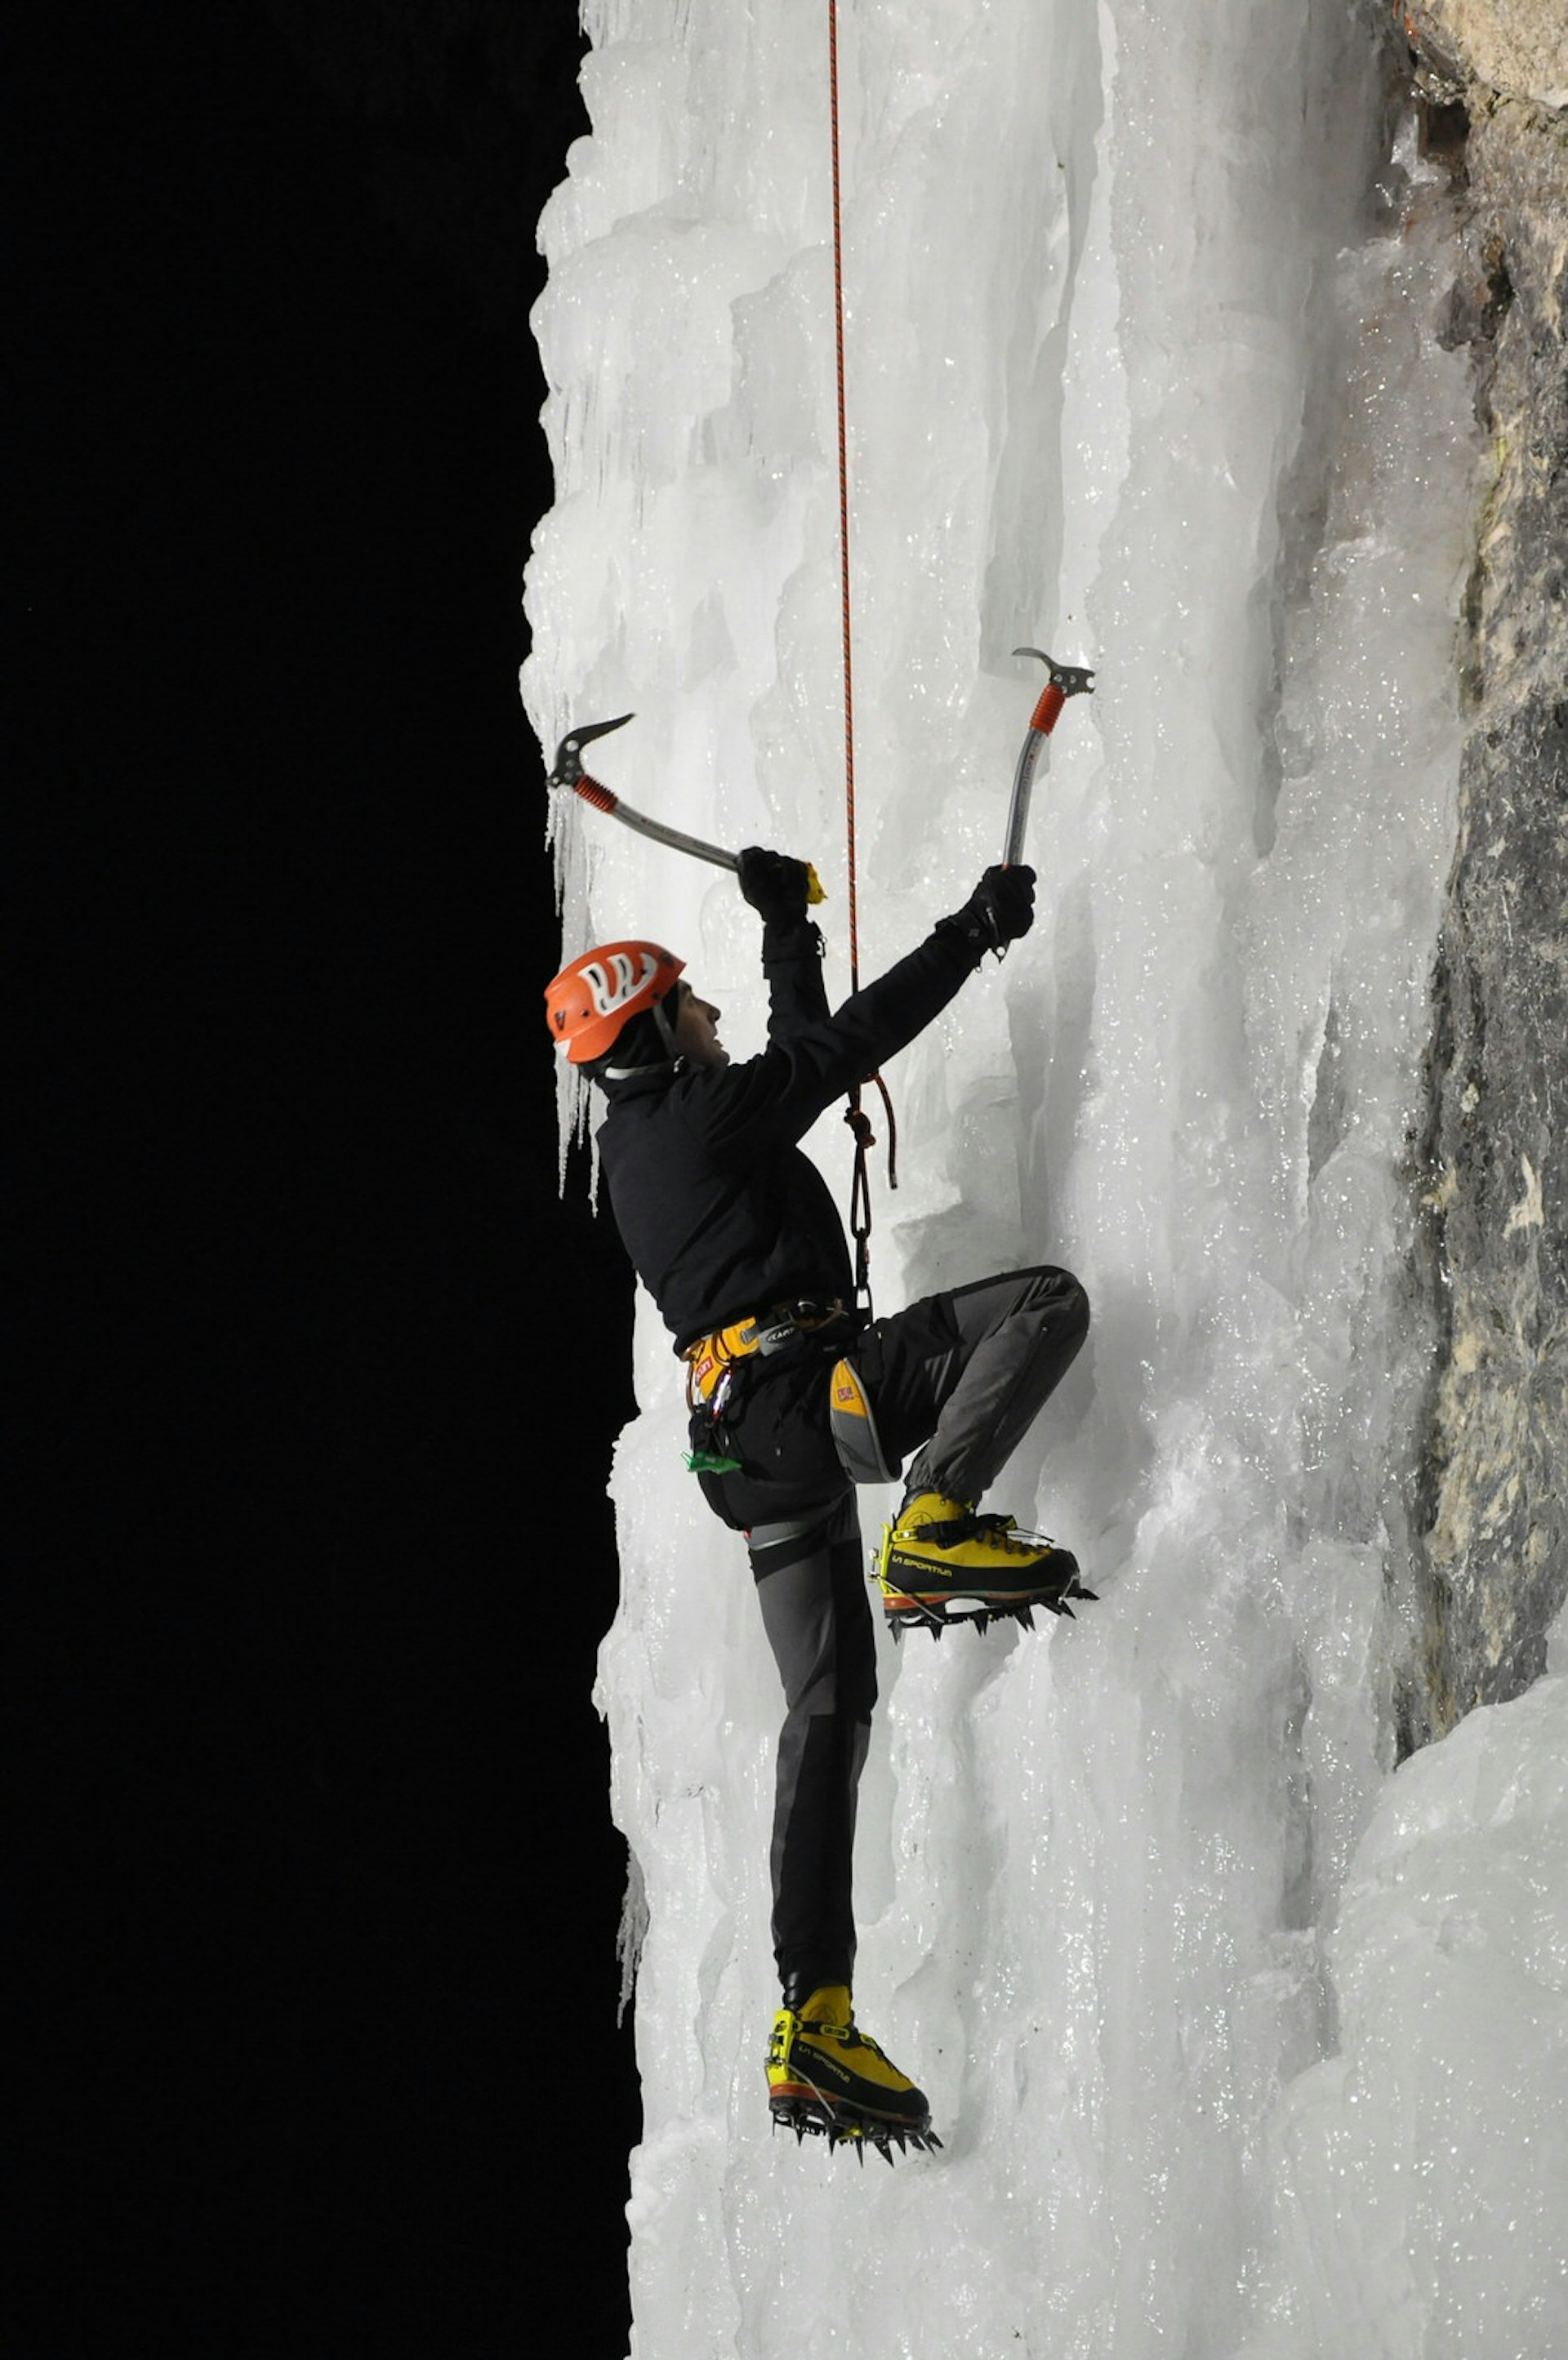 A person dressed in black wearing a safety harness, helmet and metal crampon uses two ice axes to scale a frozen wall of ice